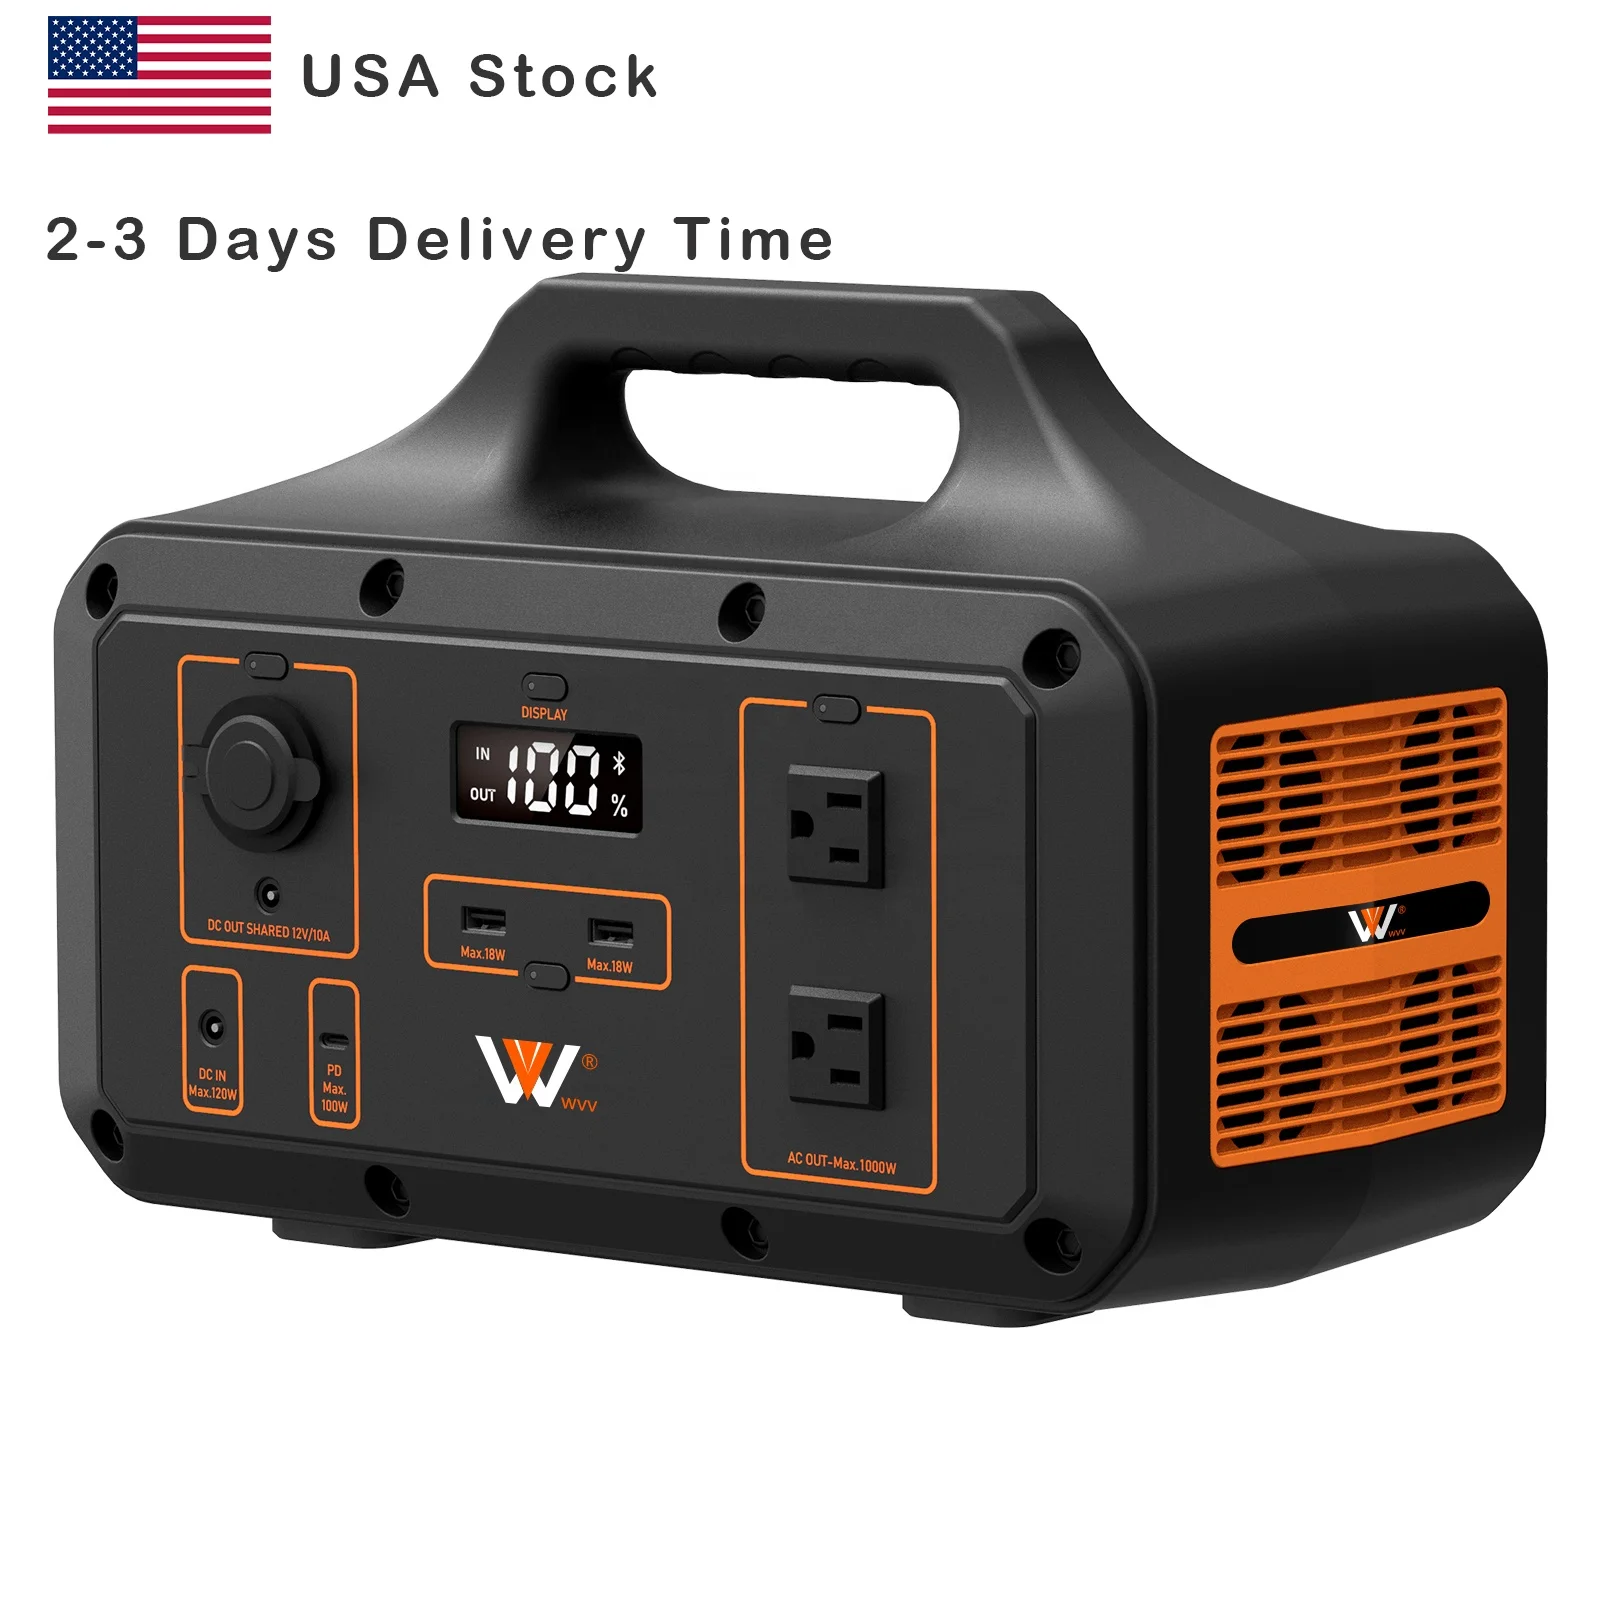 

Portable Power Station 1000W Outdoor Backup Lithium Battery Power Supply Mini Generator for Tent Camping VanLife Adventures